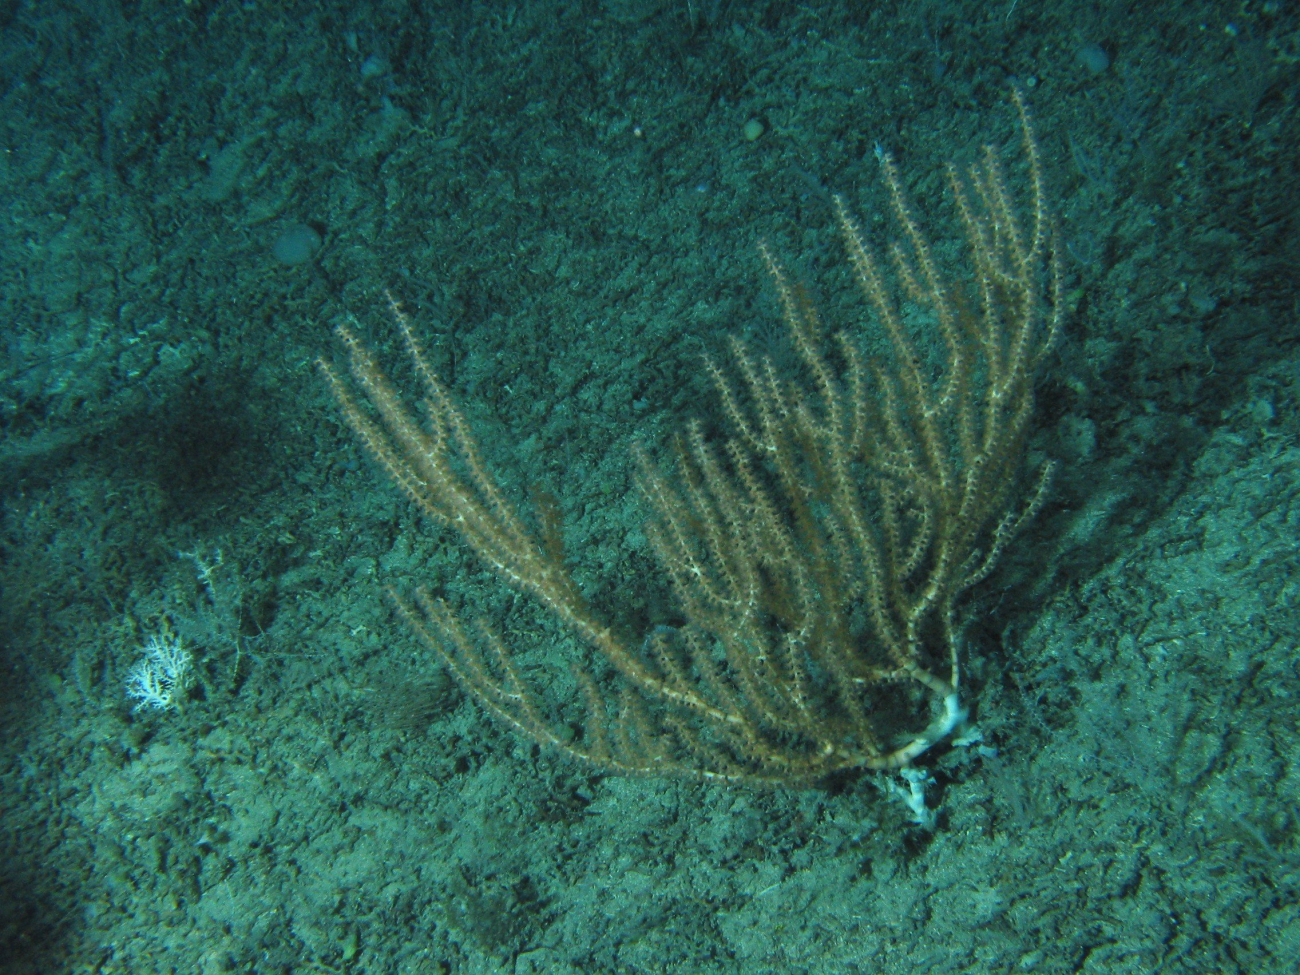 A bamboo coral and a small lophelia coral